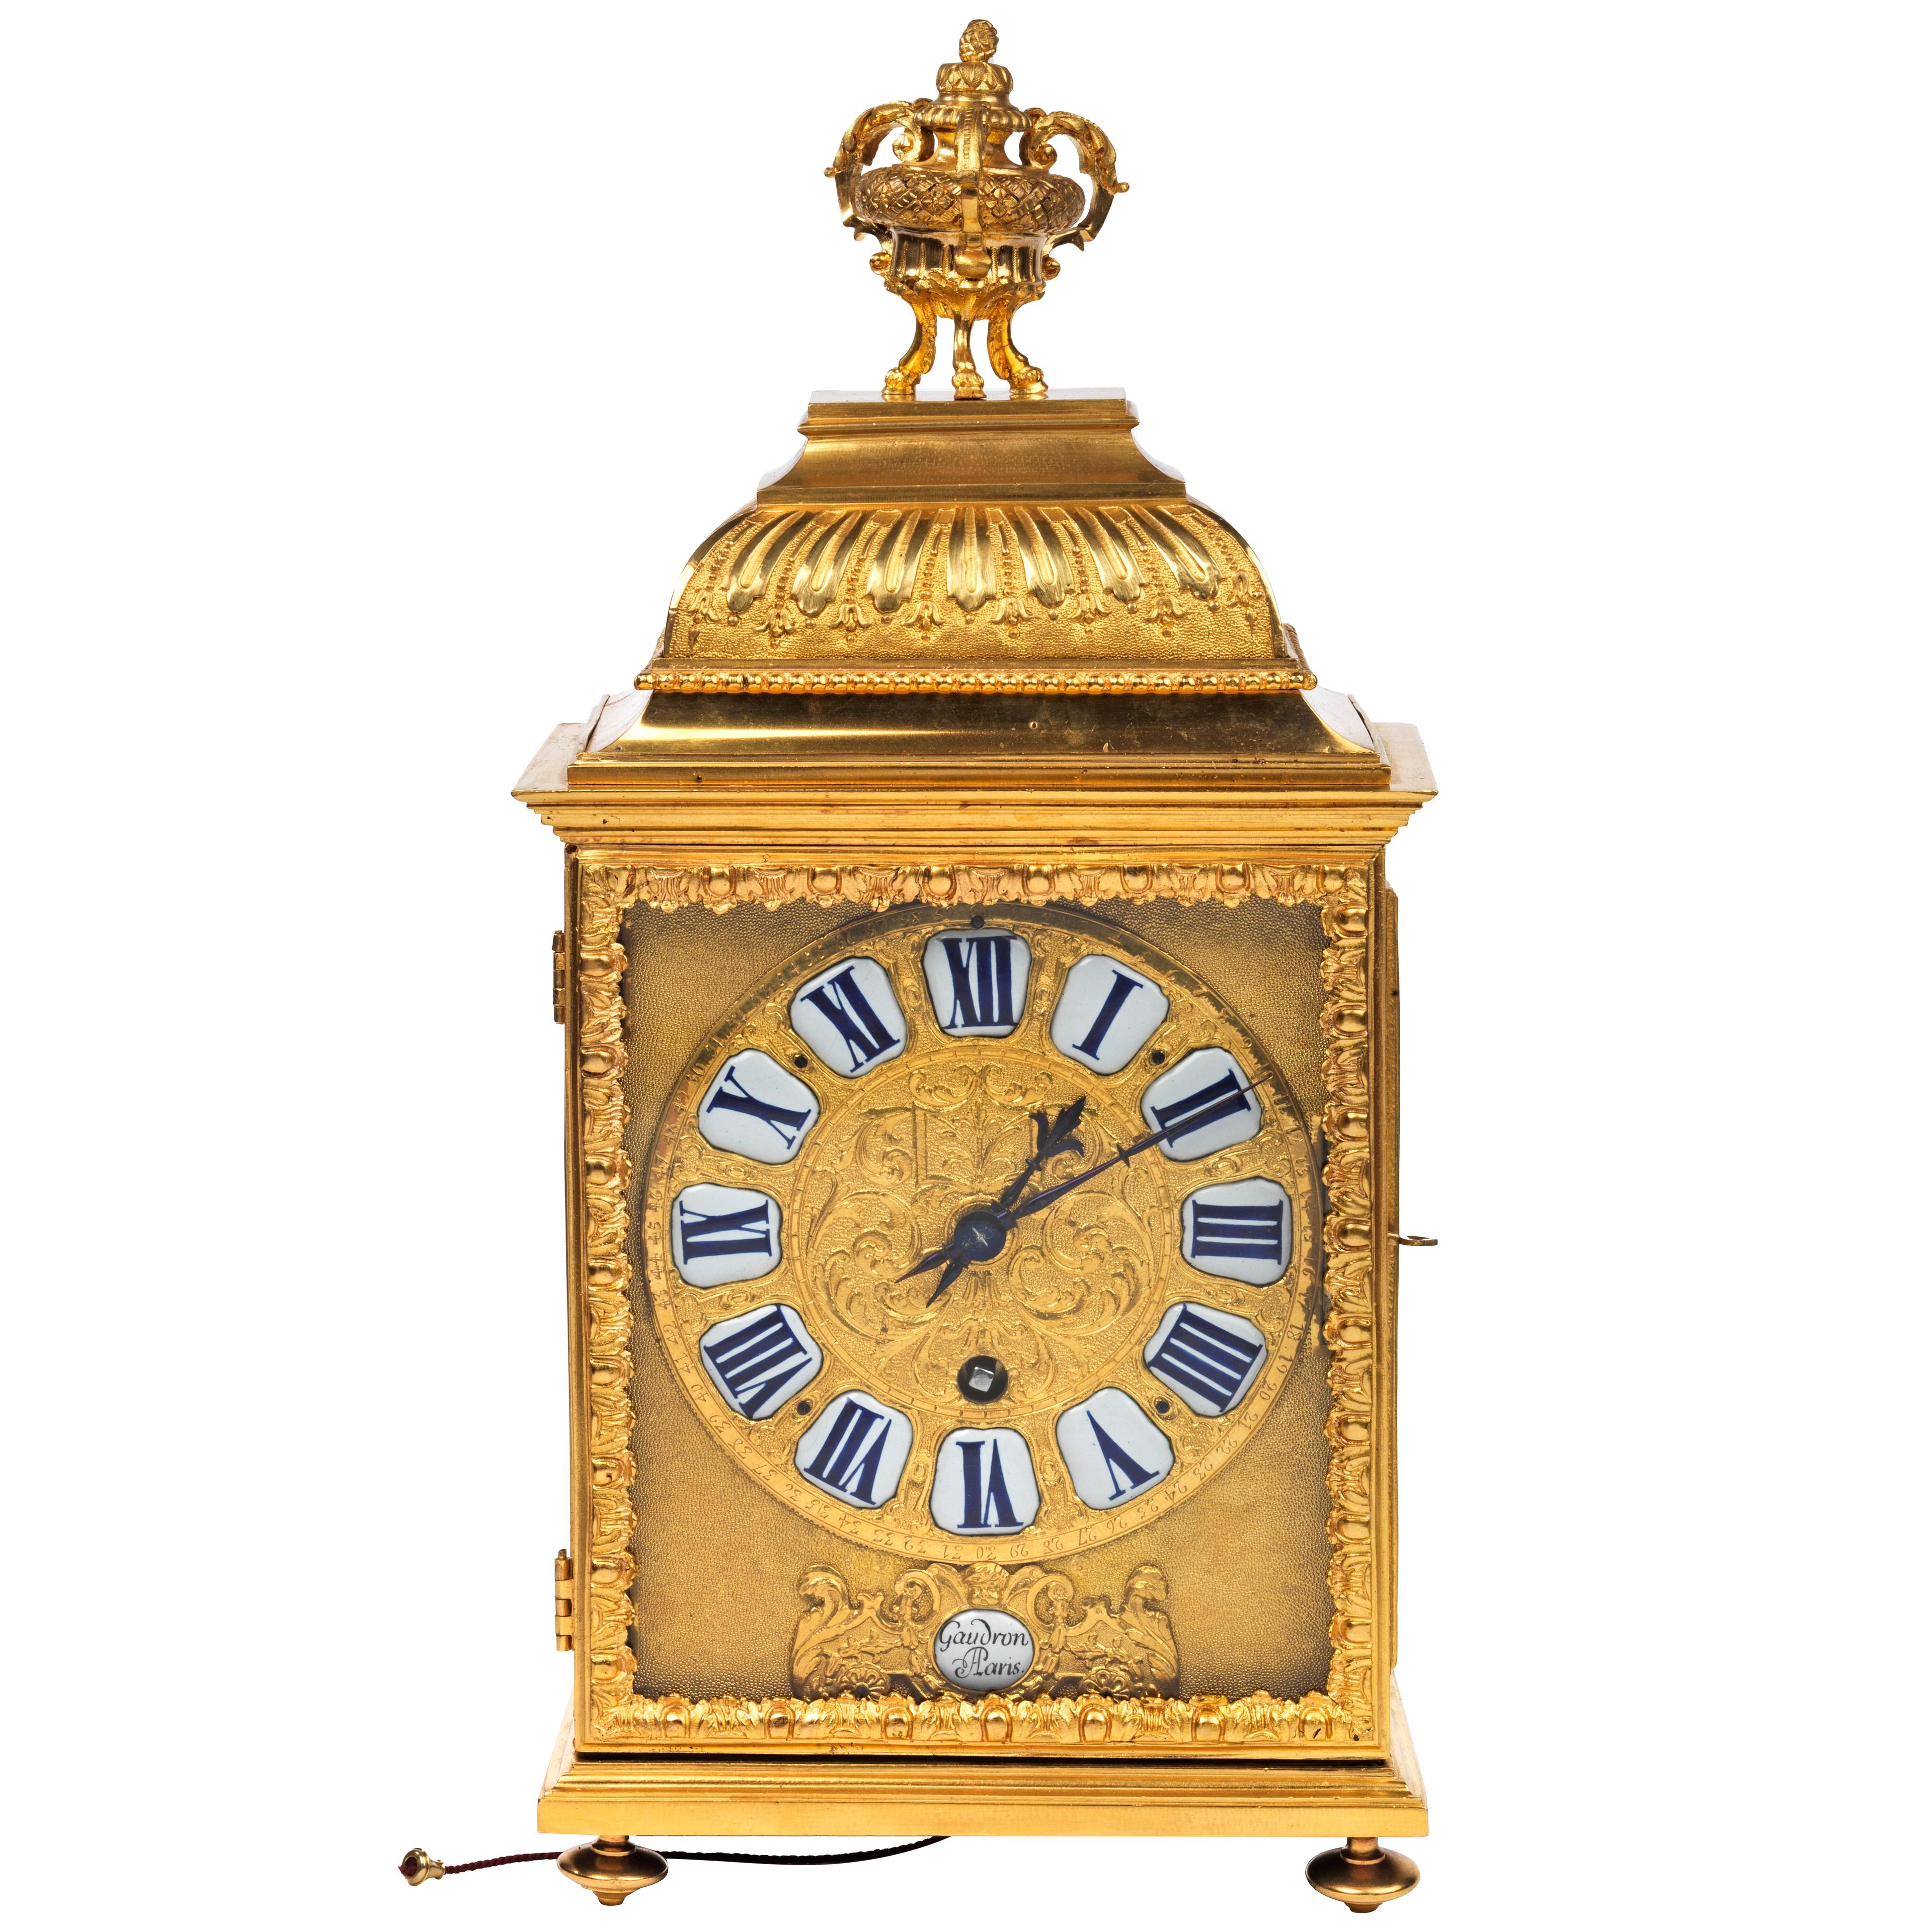 A Fine and Rare Louis XIV Brass-Cased Bracket Clock By Gaudron